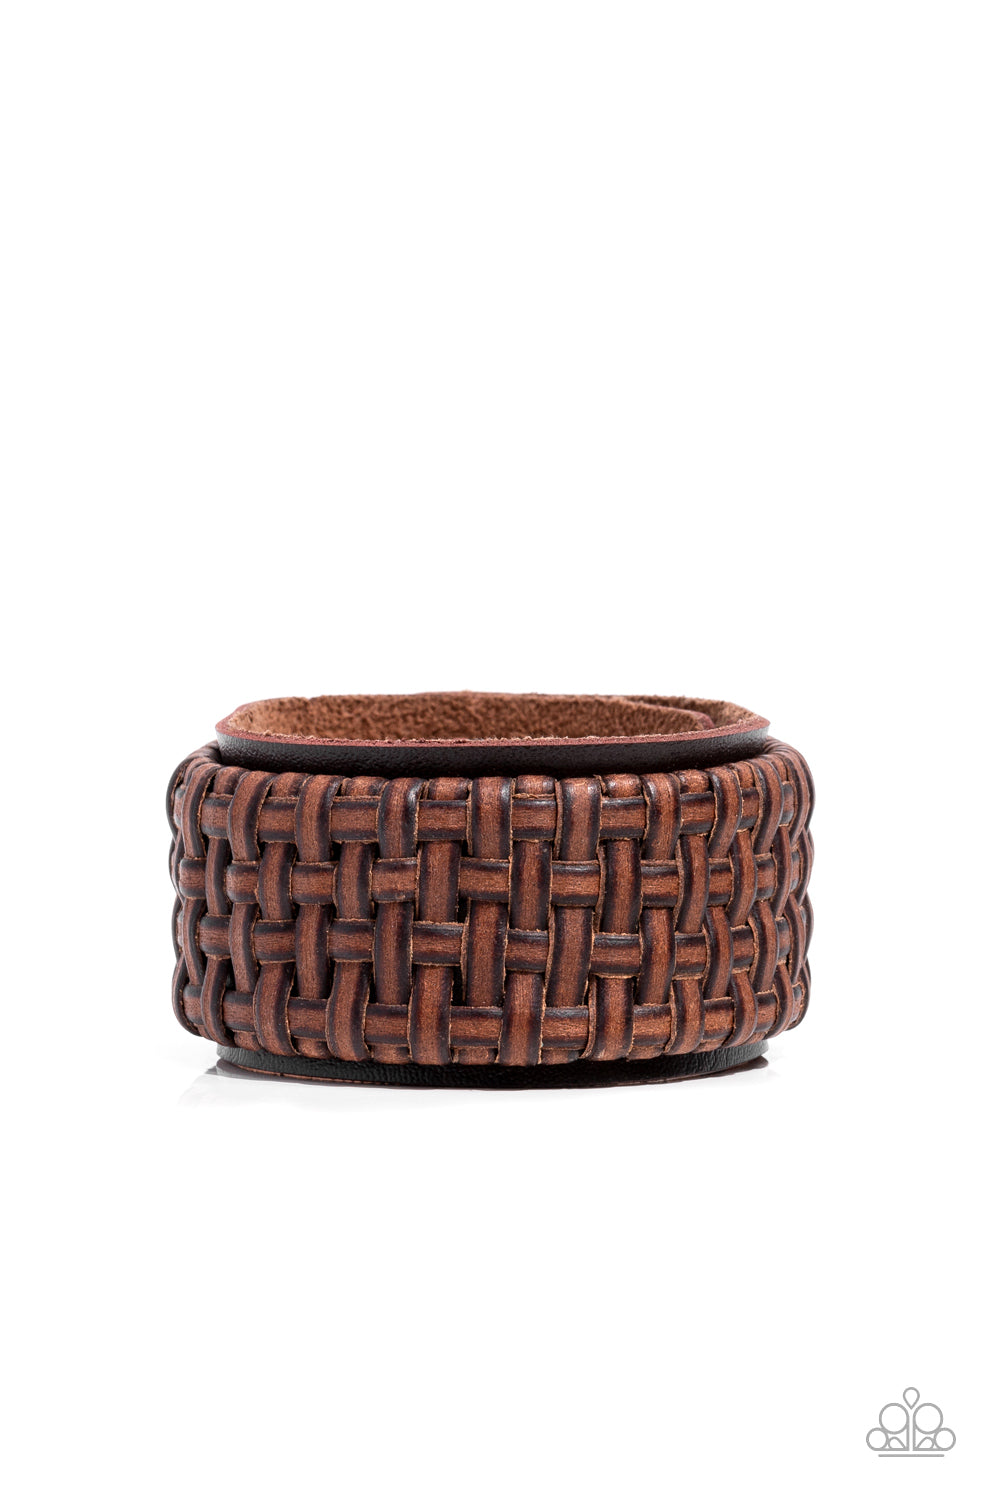 Distressed leather laces weave into a wicker-like pattern, creating a thick band of texture that wraps around a leather band. The textured overlay is studded in place across the front of the brown leather band, resulting in a rustic centerpiece. Features an adjustable snap closure.  Sold as one individual bracelet.